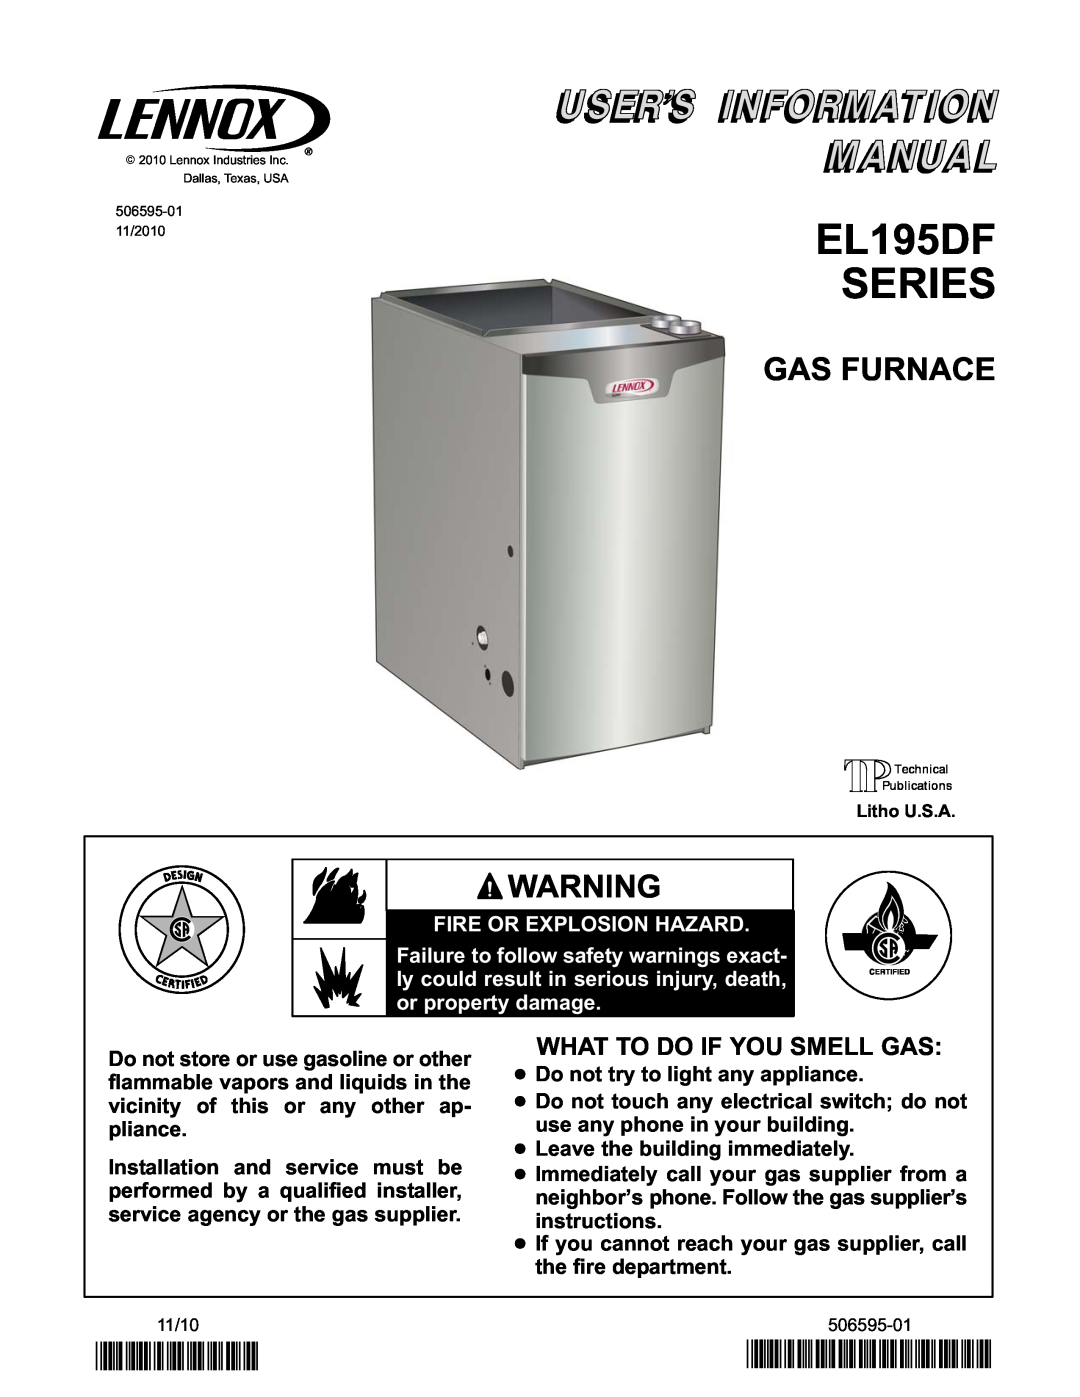 Lenox EL195UH SERIES manual EL195DF SERIES, P506595-01, Gas Furnace, 2P1110, What To Do If You Smell Gas 